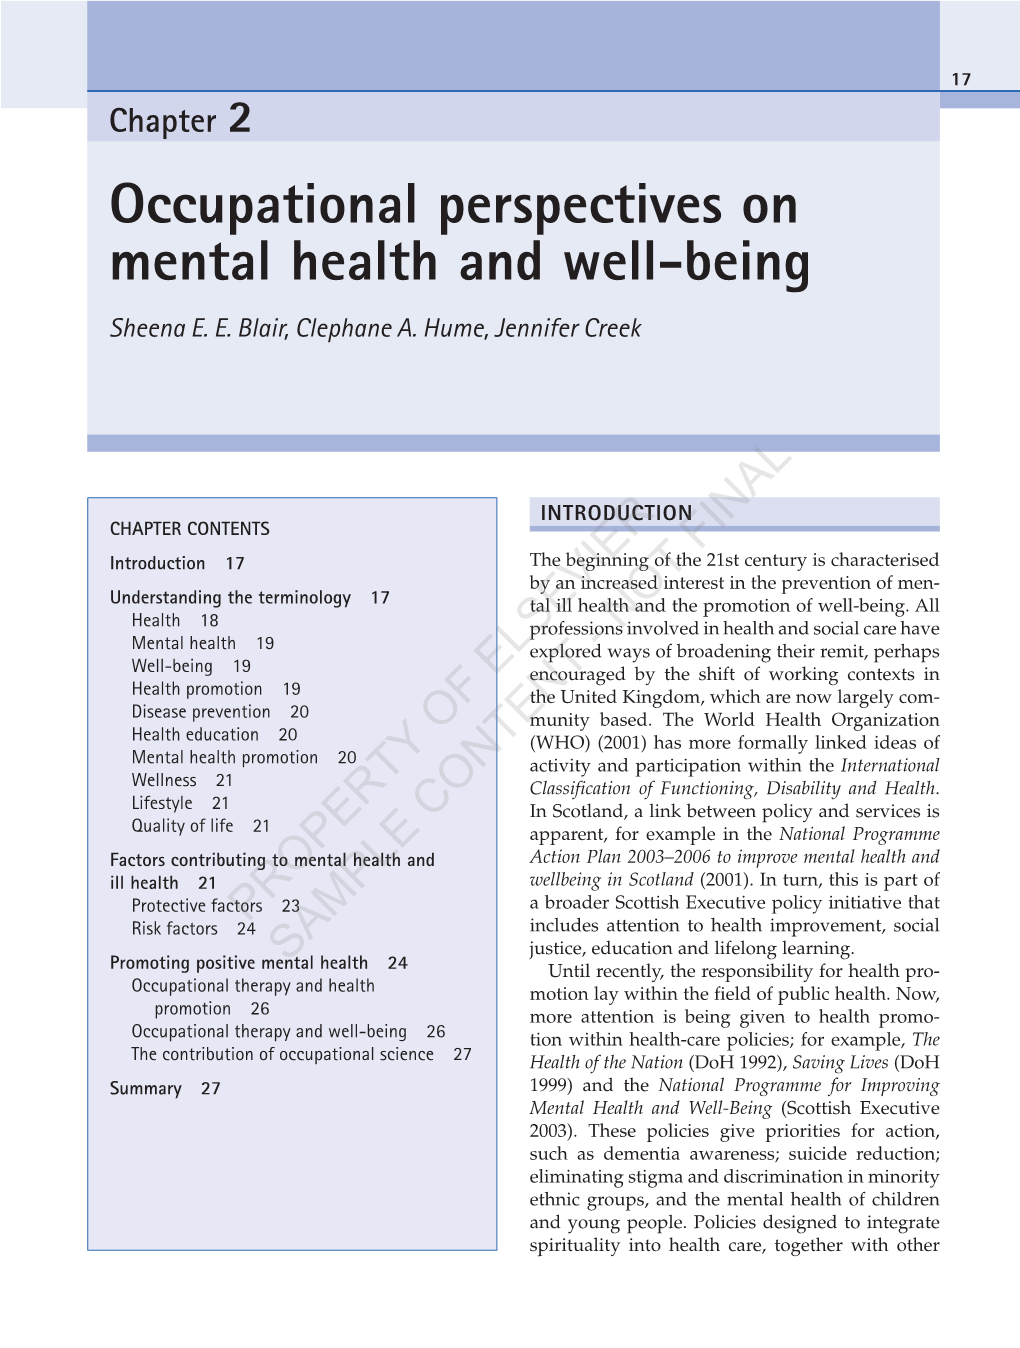 Occupational Perspectives on Mental Health and Well-Being Sheena E